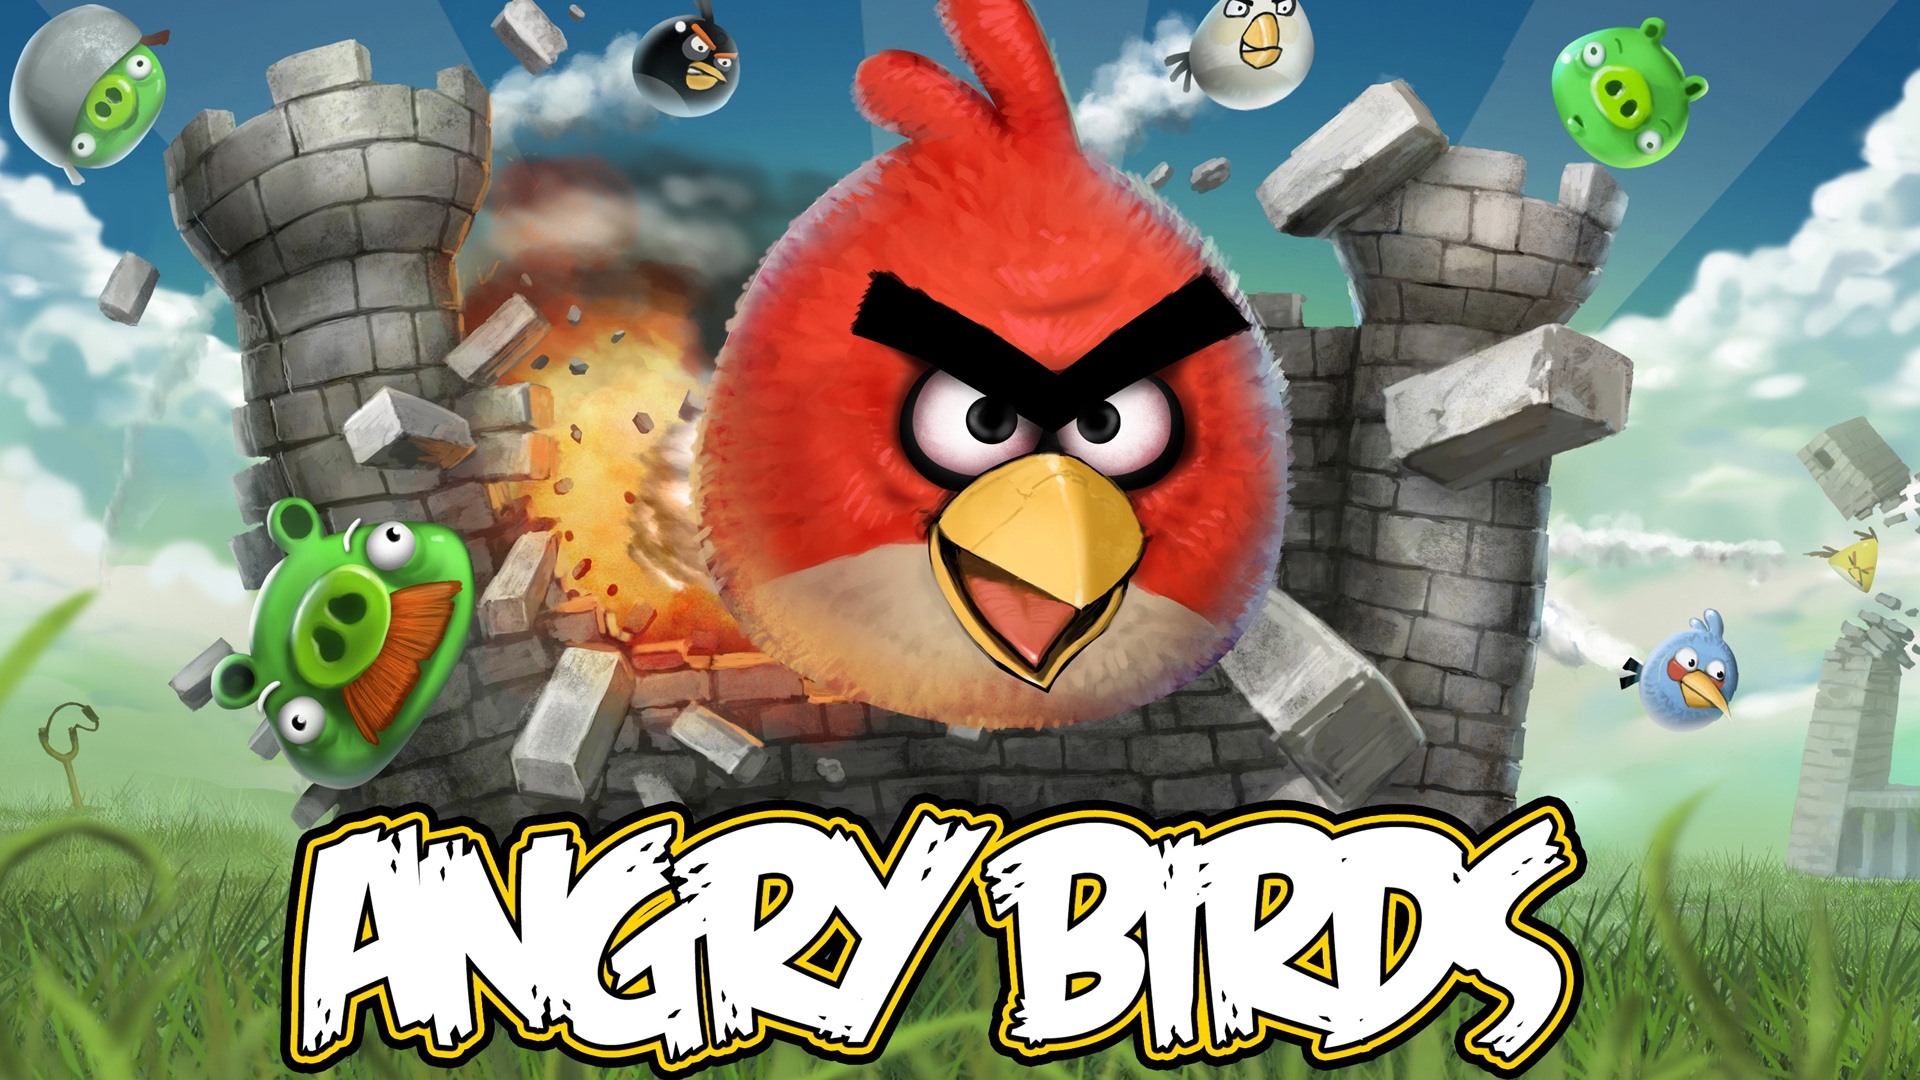 Angry Birds Game Wallpapers #15 - 1920x1080